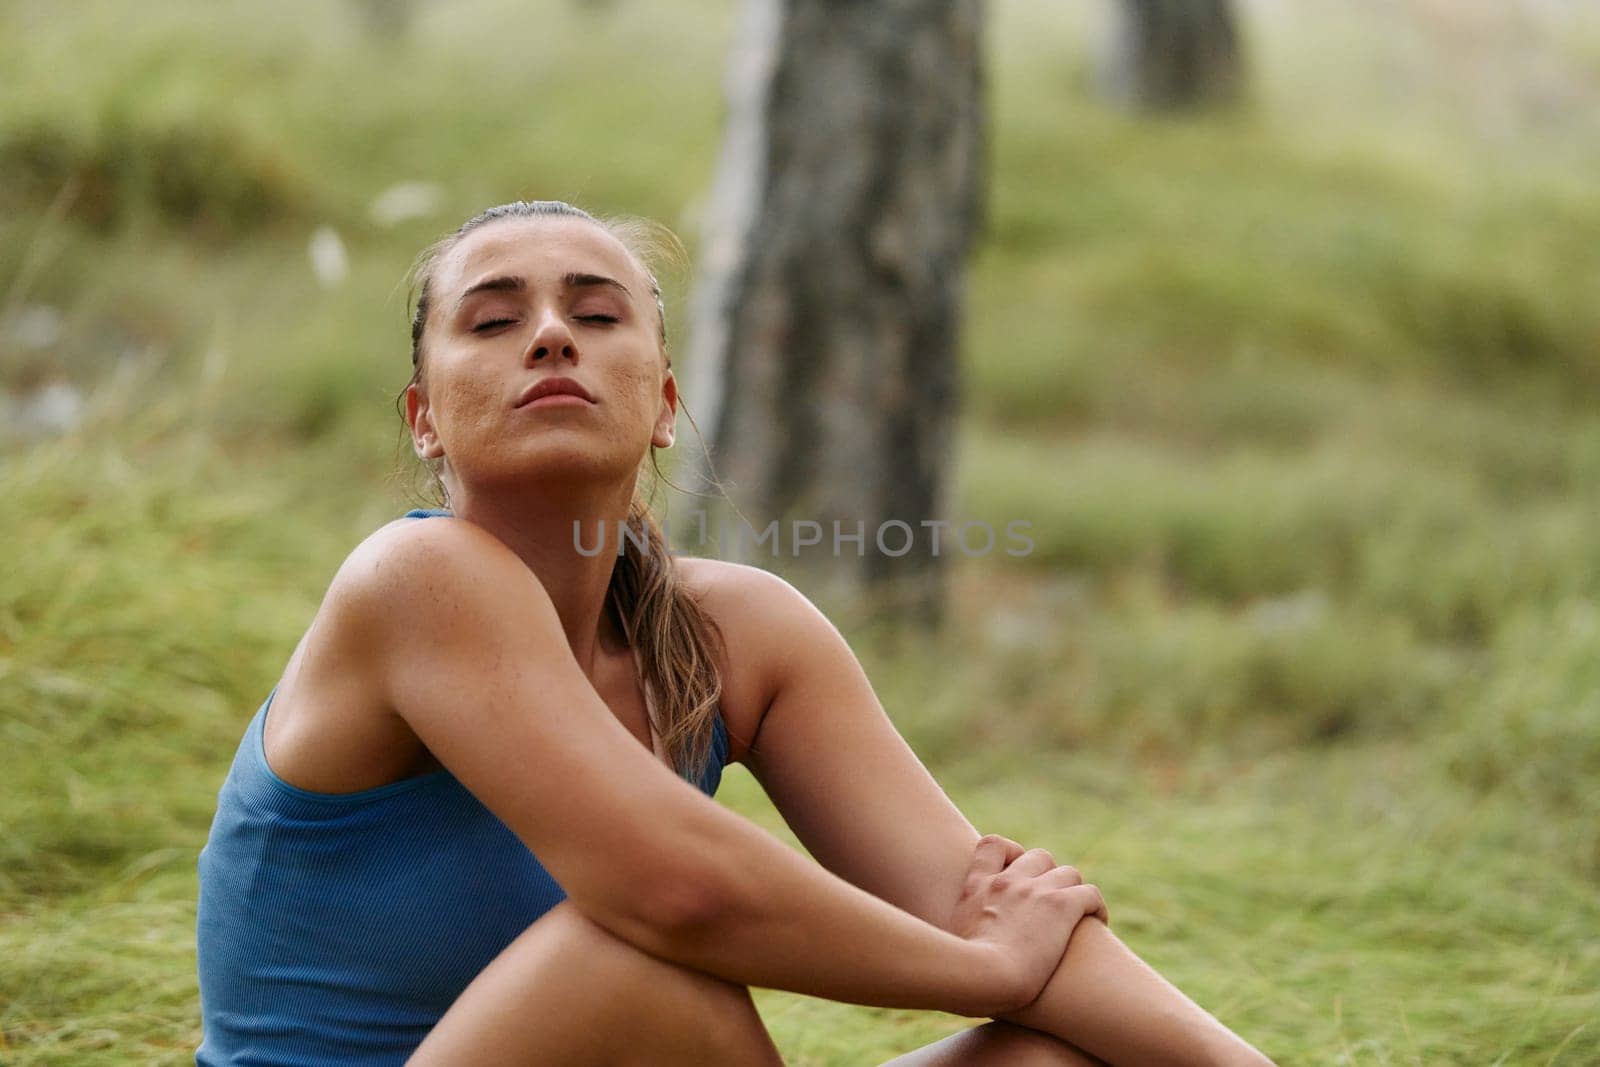 A woman takes a moment to rest and recuperate after an intense run, finding solace and rejuvenation in the tranquility of her surroundings.